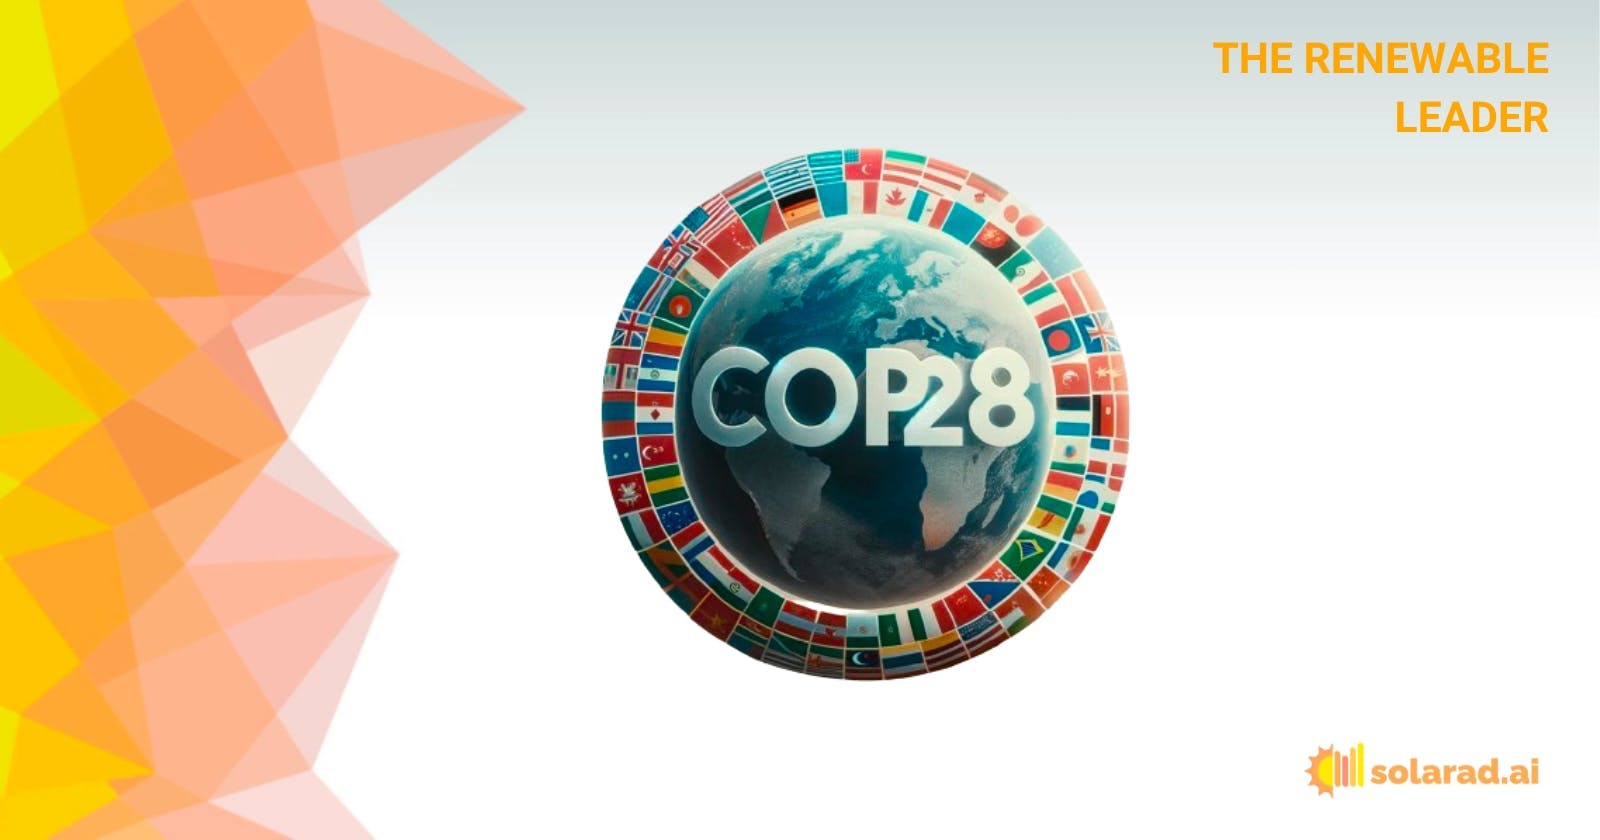 Protests, negotiations, and eyebrow-raising statements. Get the inside scoop on COP28 drama